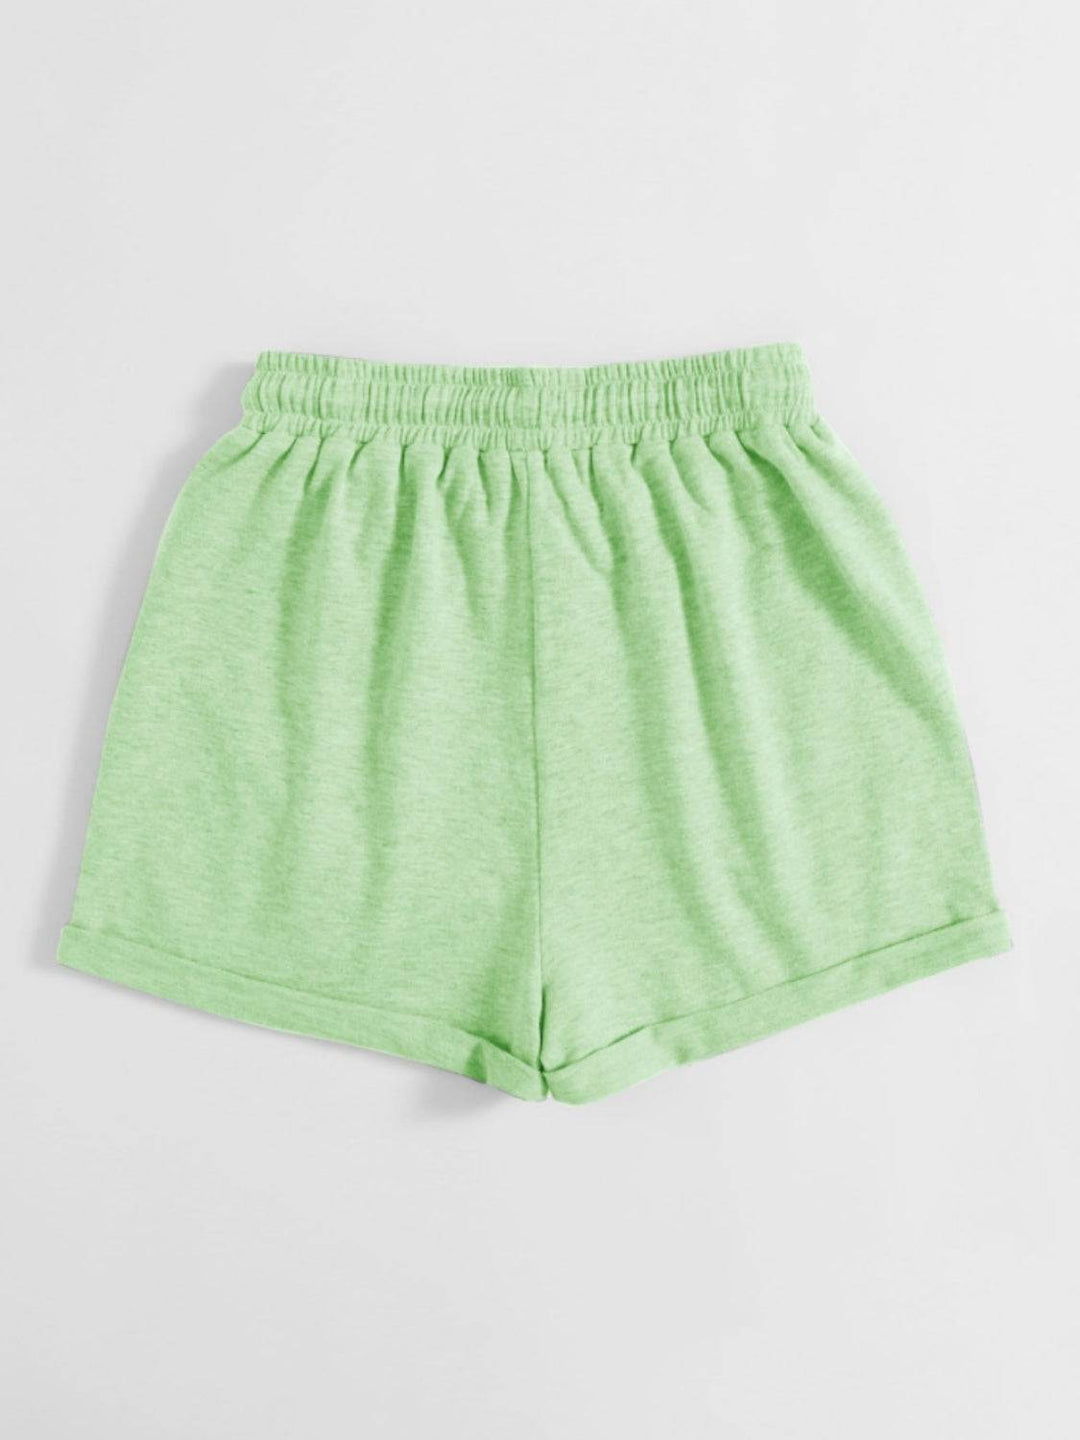 a pair of green shorts on a white background